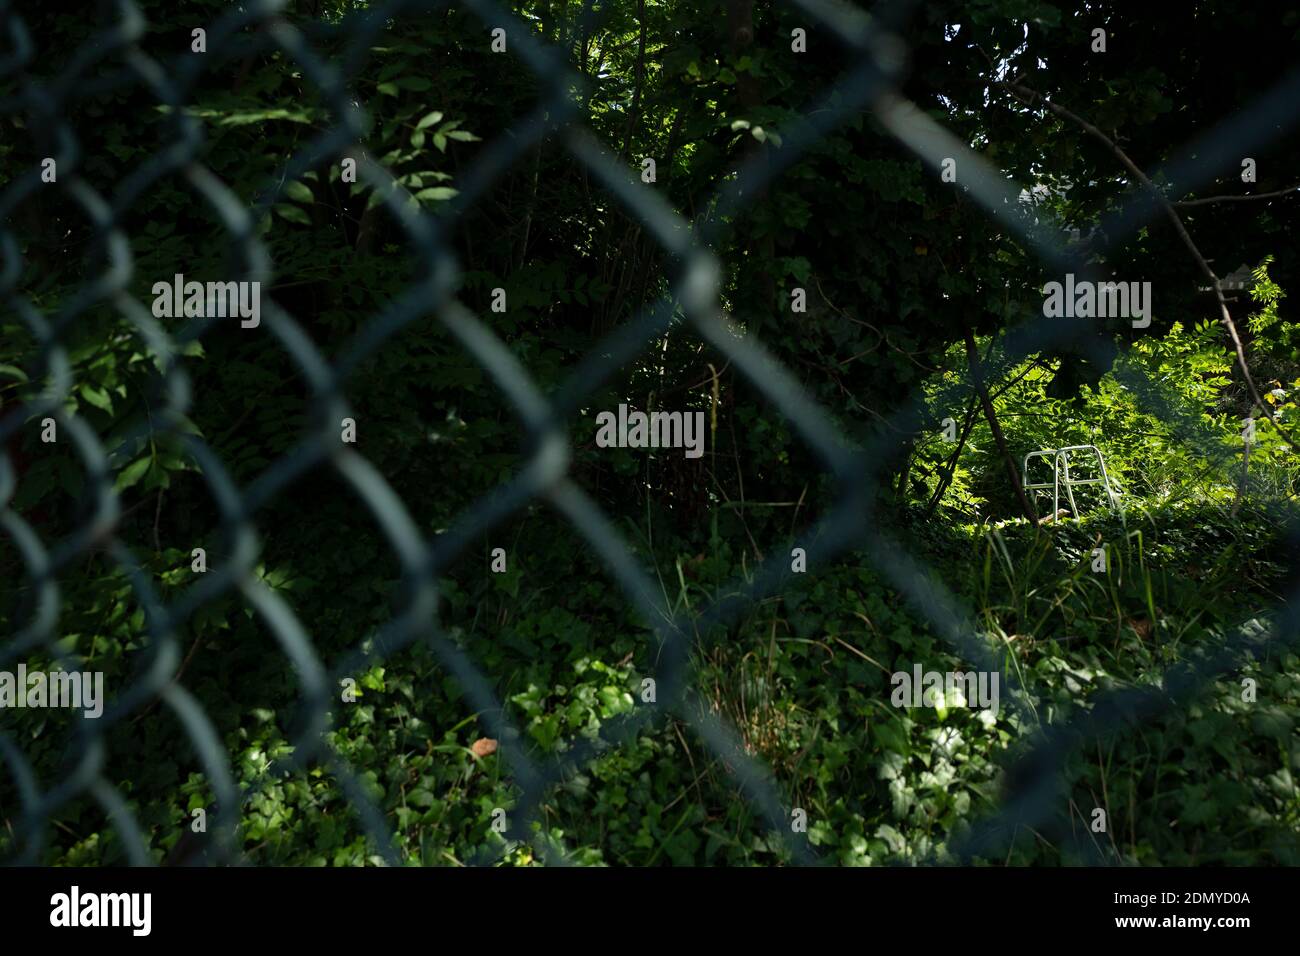 A zimmer frame is seen through a wire fence Stock Photo